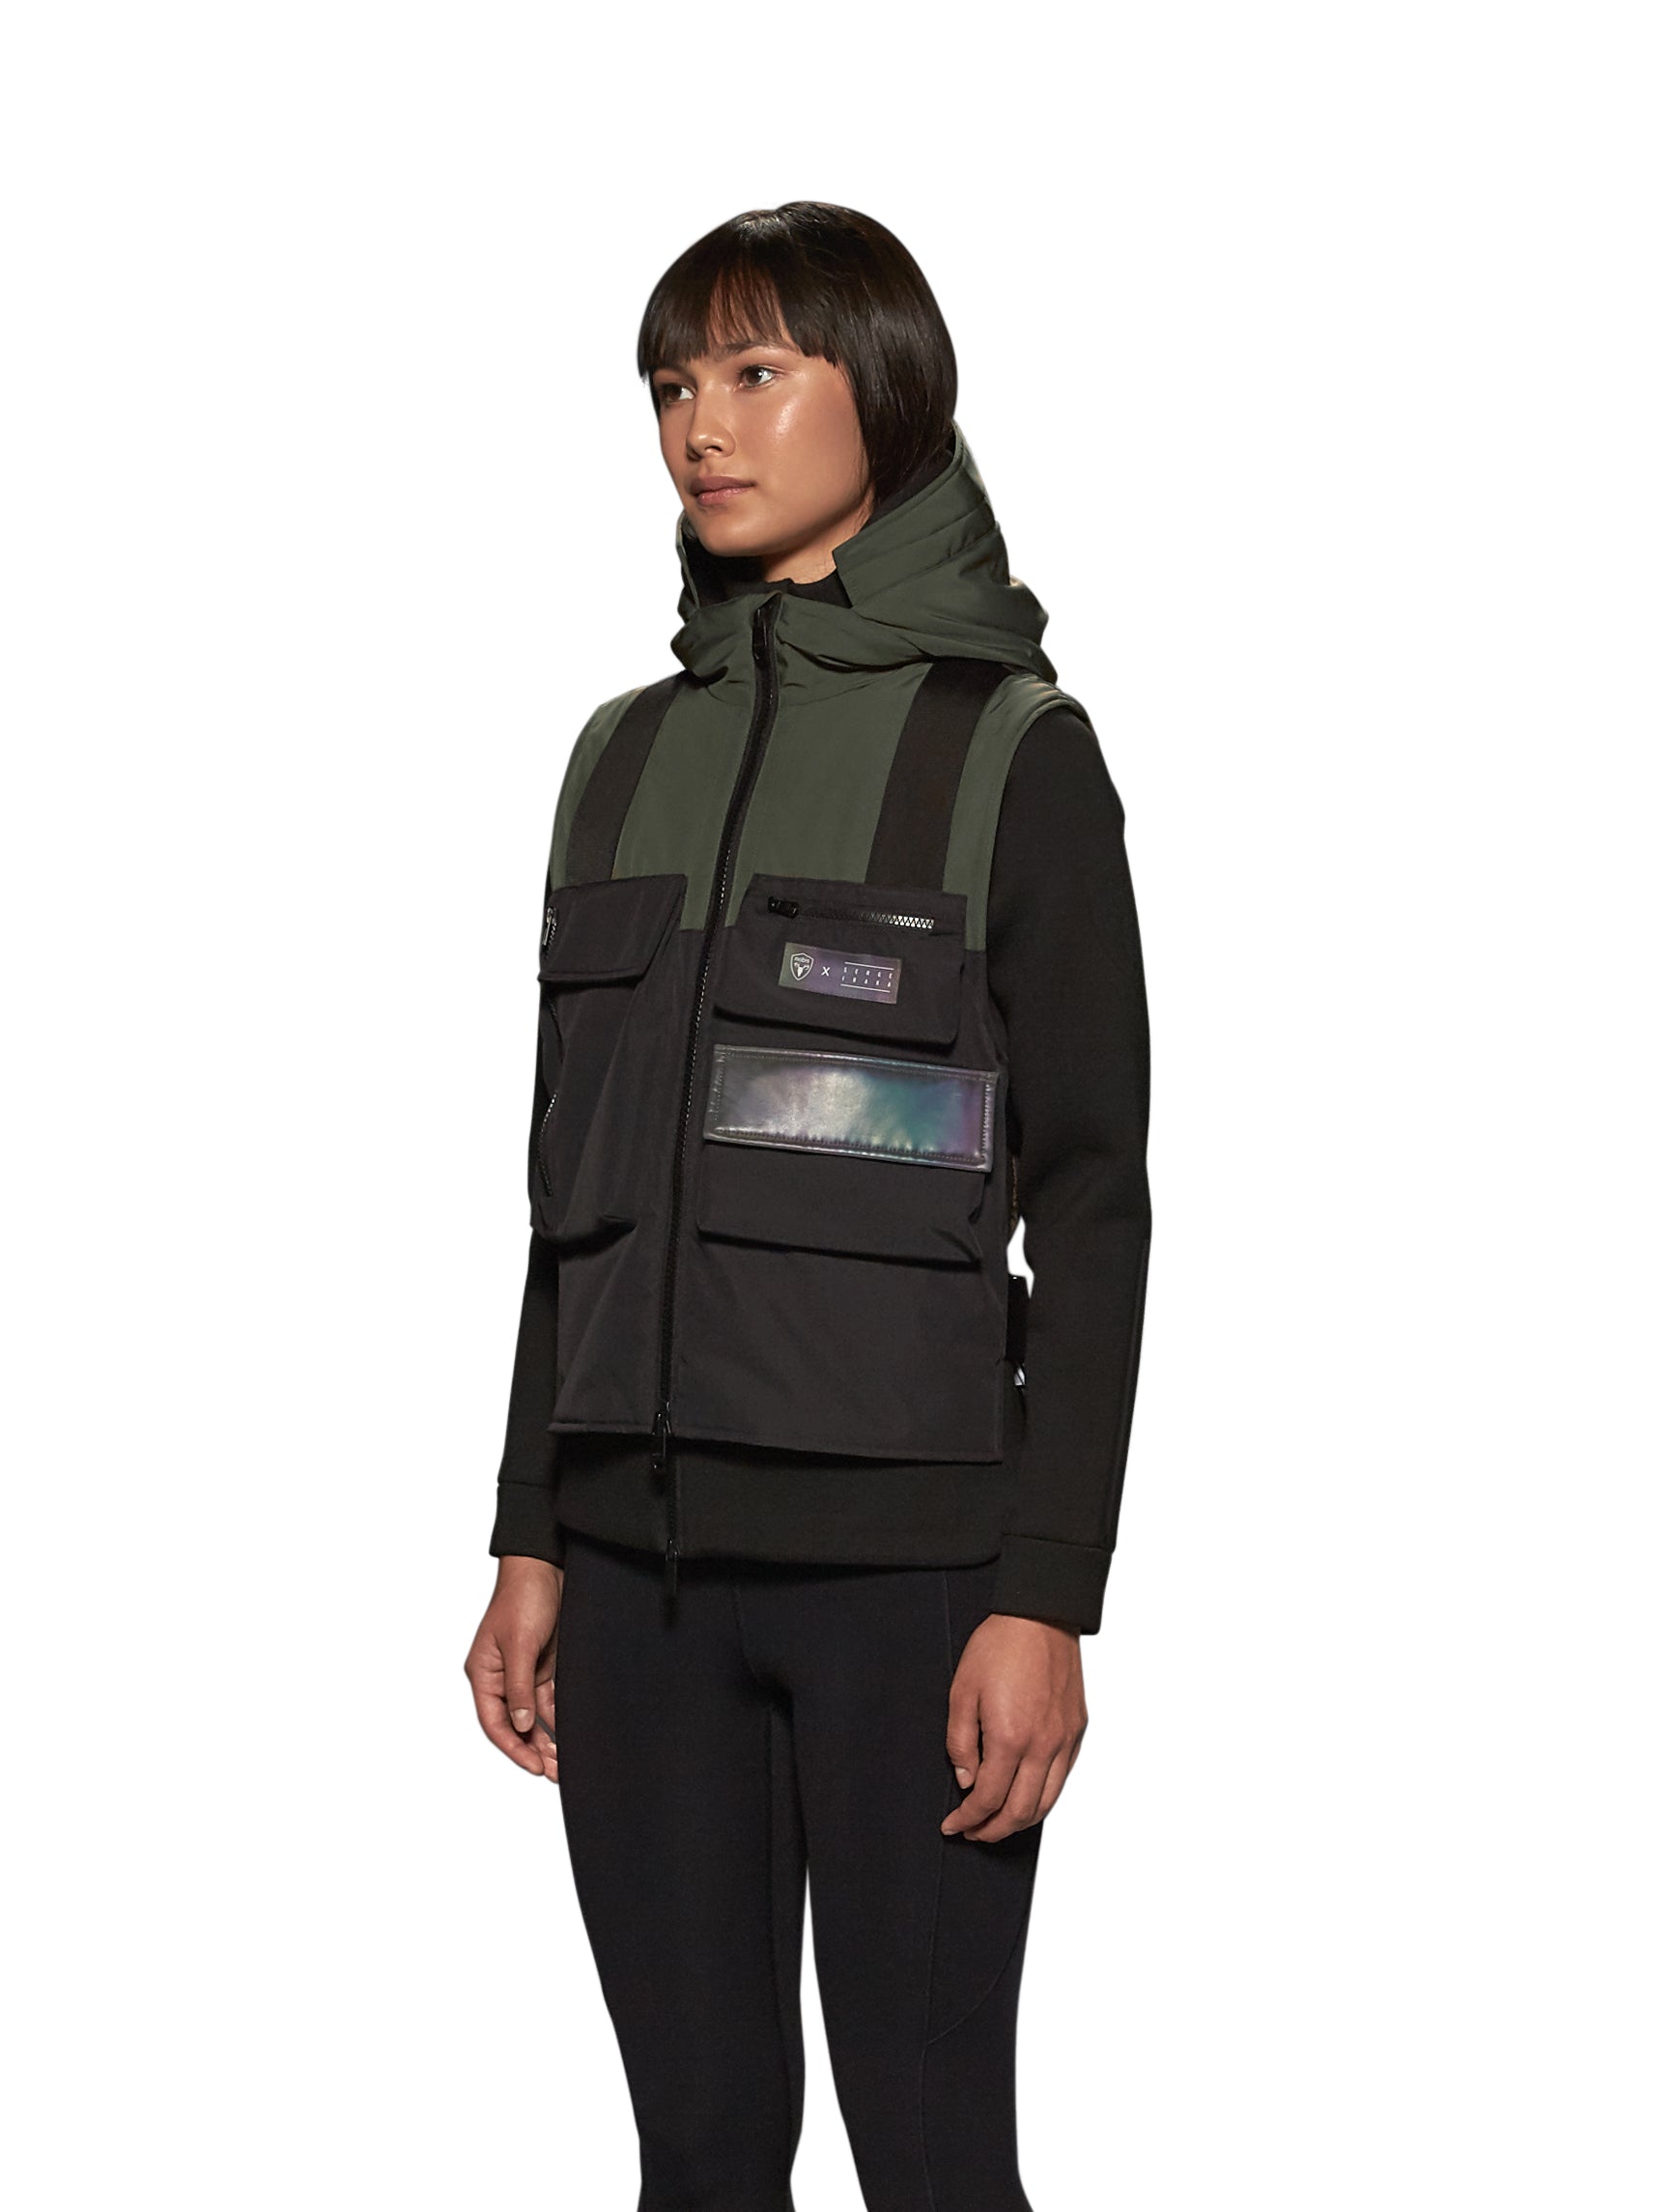 Unisex waist length hooded tactical vest with multiple exterior pockets on front and back, and adjustable side webbing fasteners, colour blocked in Fatigue/Black